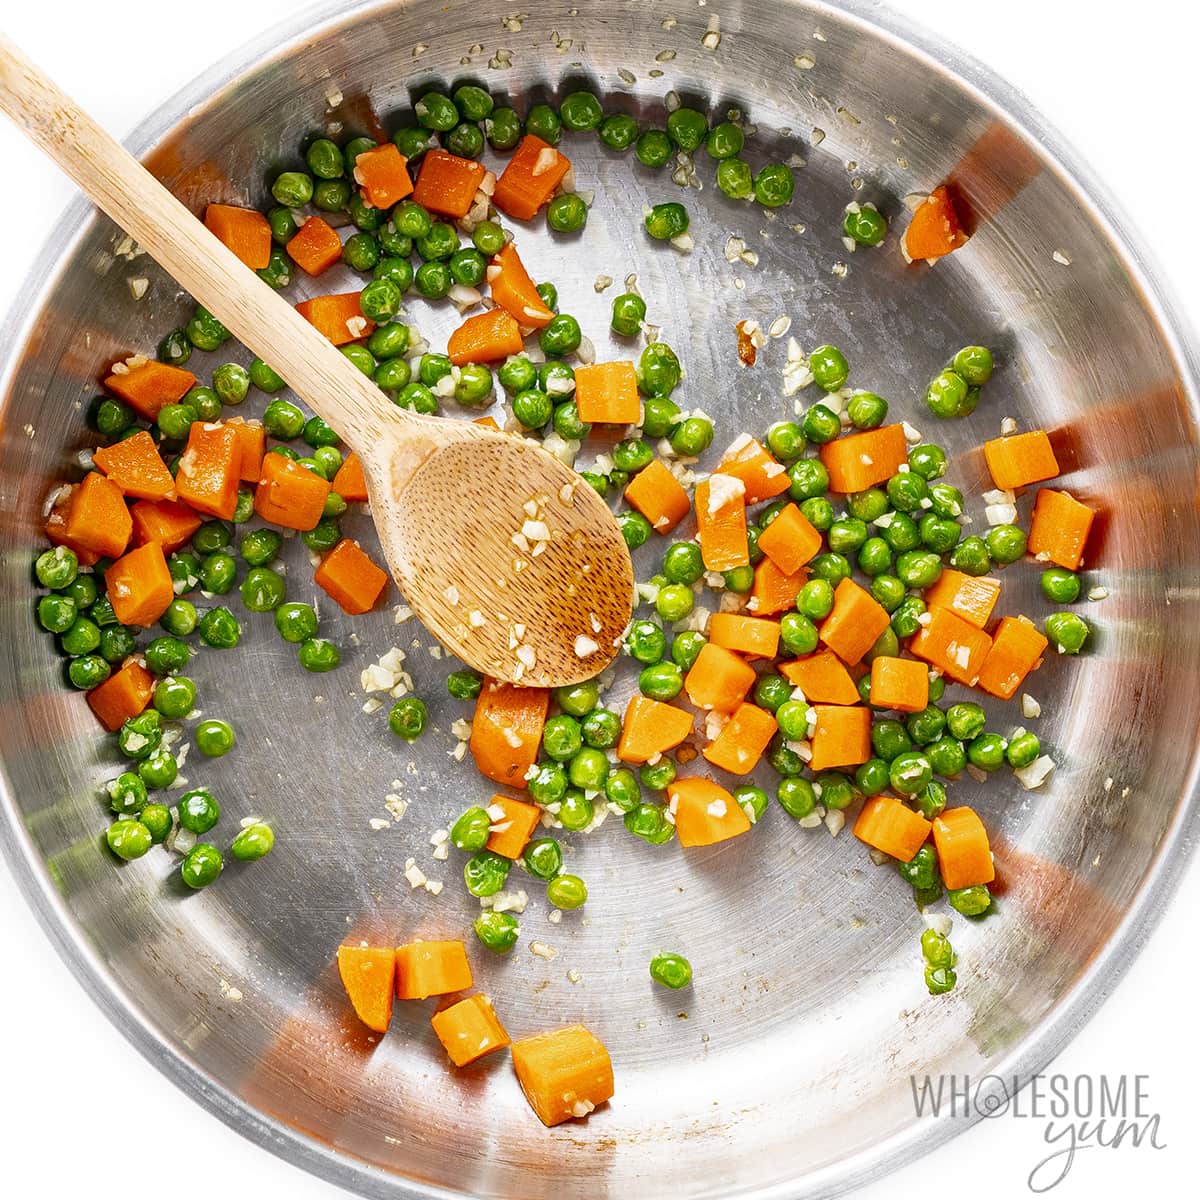 Garlic added to peas and carrots.